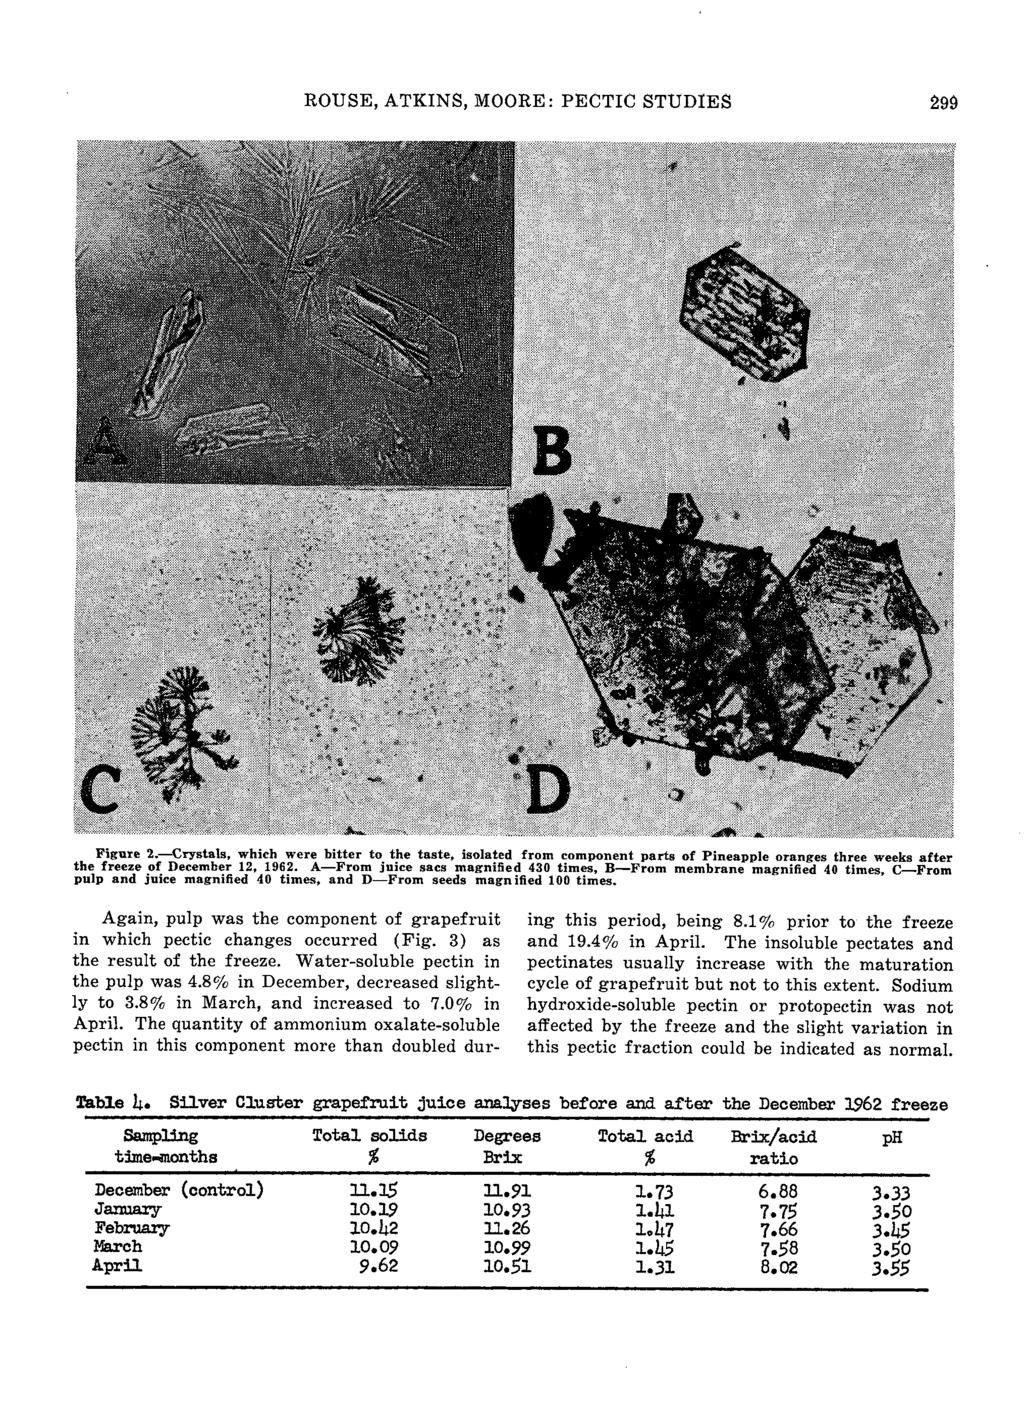 ROUSE, ATKINS, MOORE: PECTIC STUDIES 299 Figure 2. Crystals, which were bitter t the taste, islated frm cmpnent parts f Pineapple ranges three weeks after the freeze f December 12, 1962.